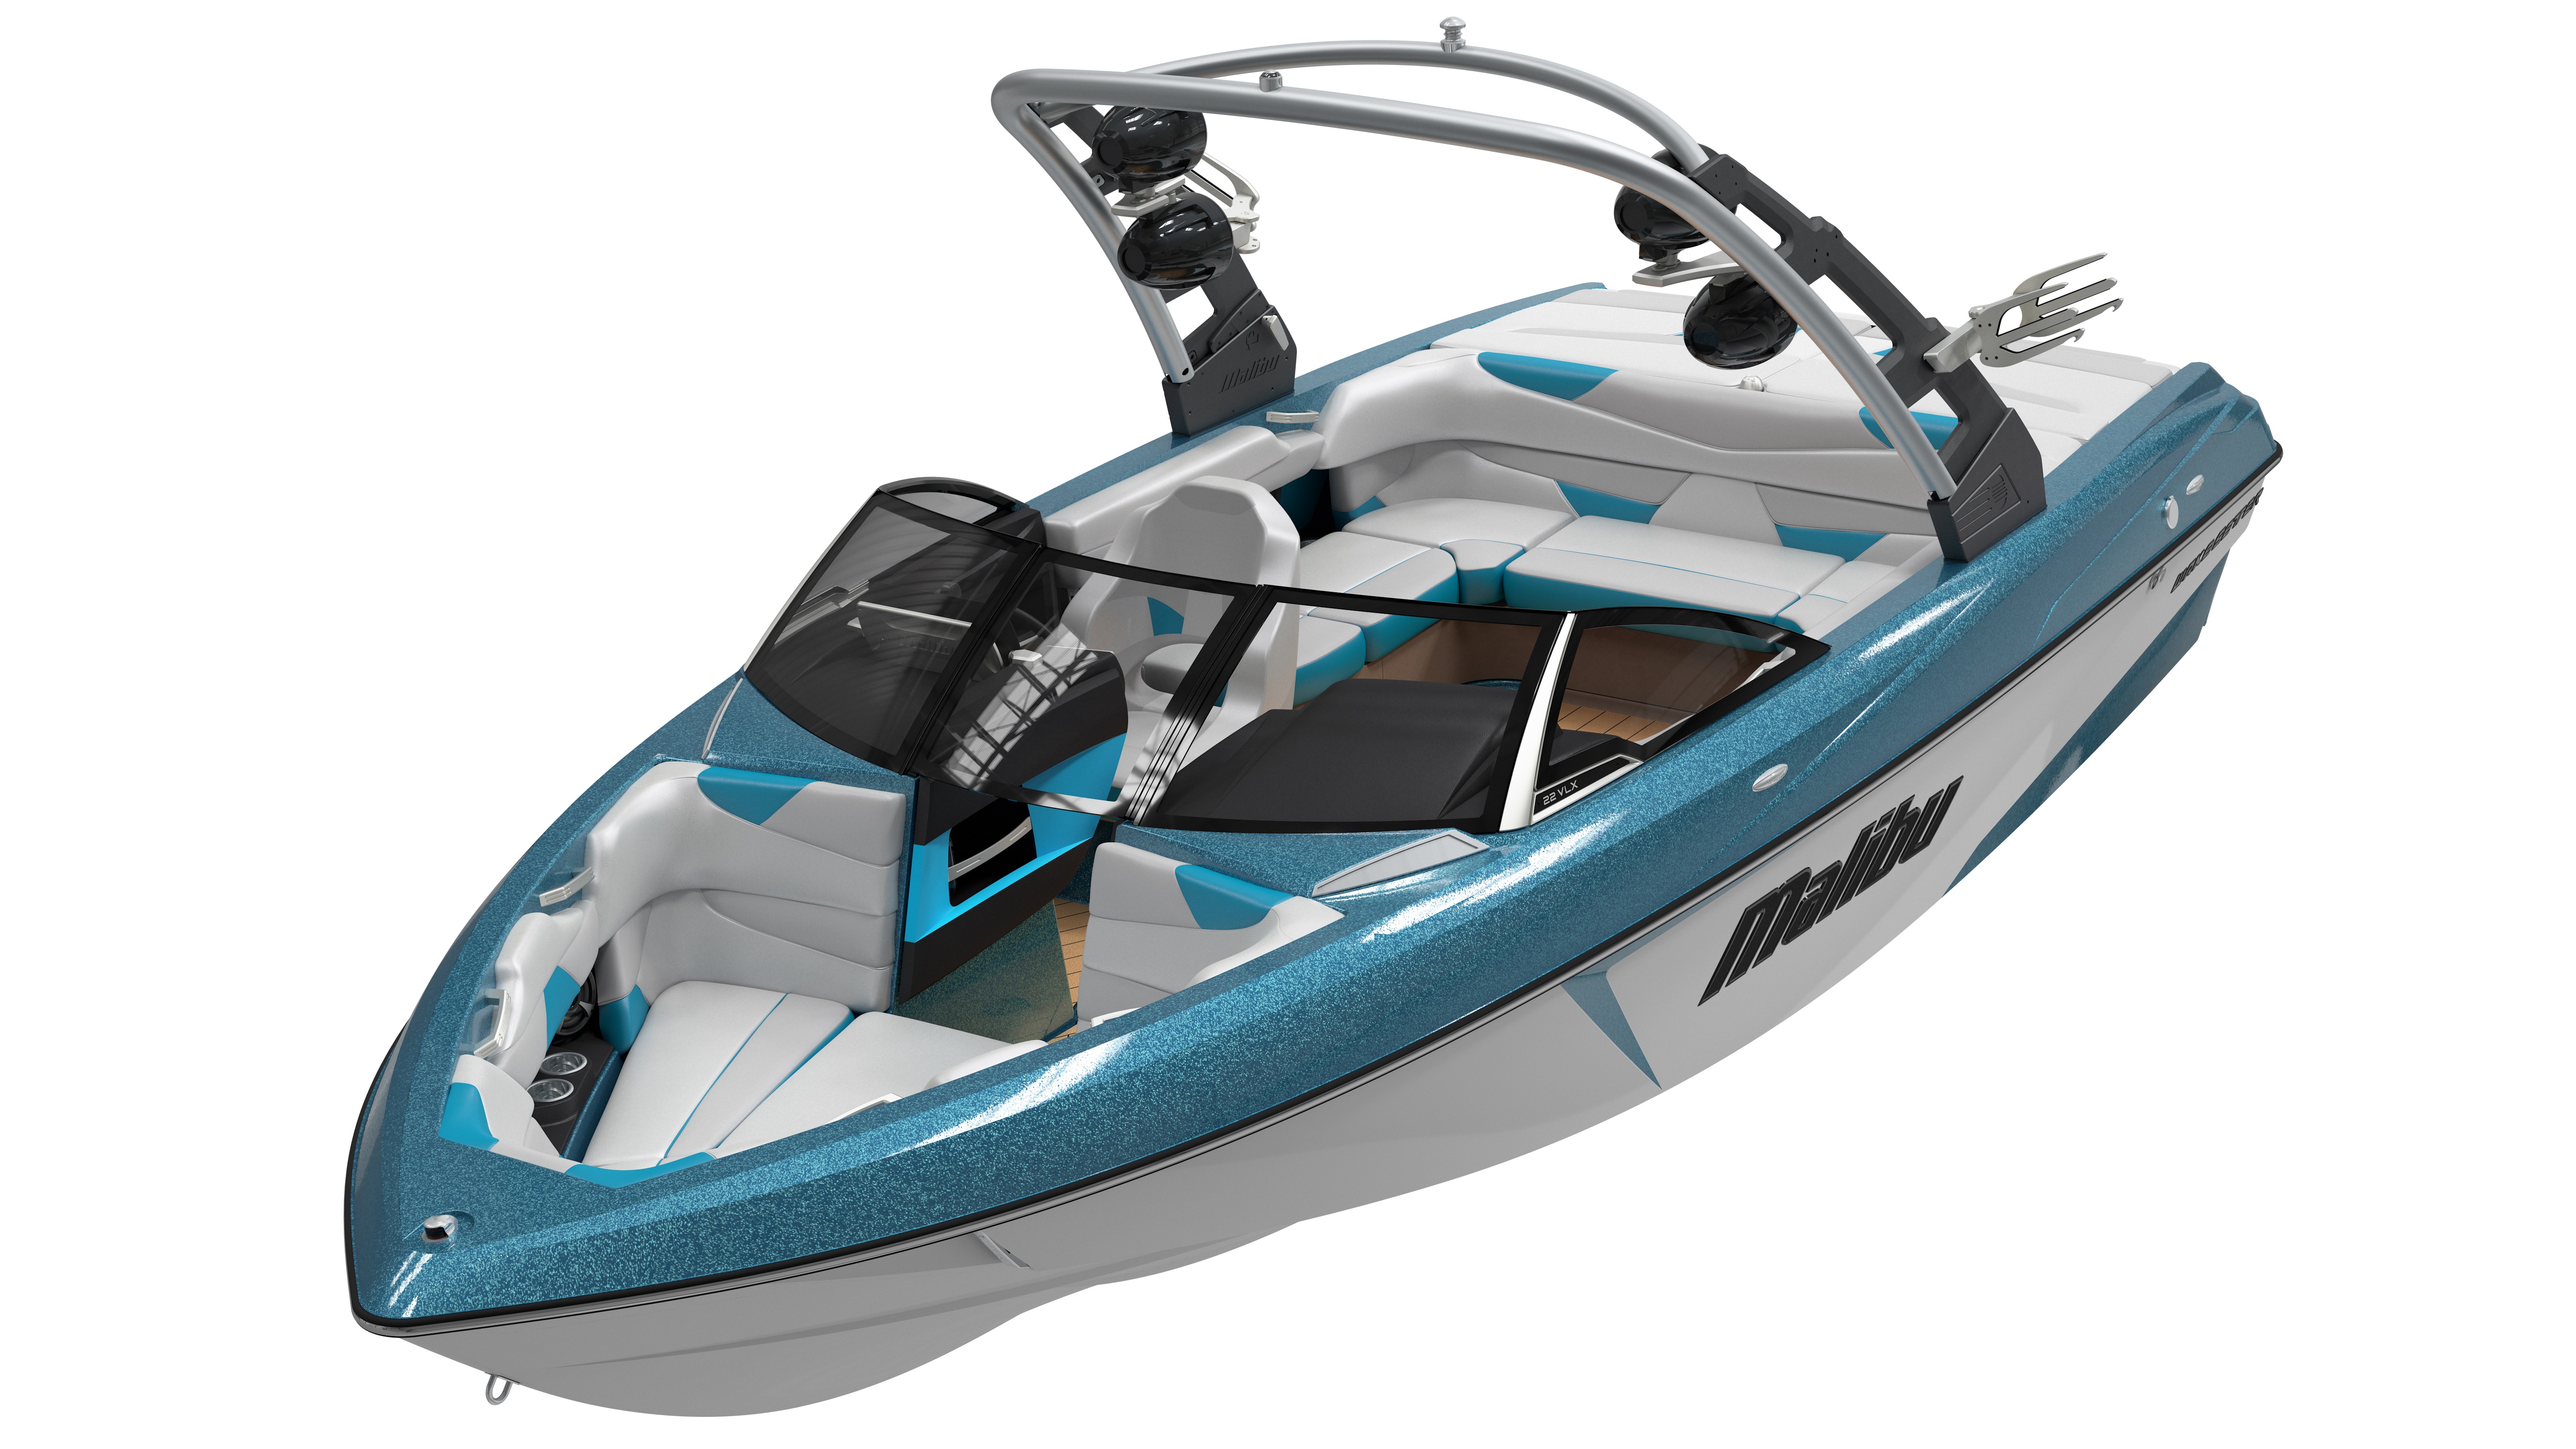 Malibu Wakesetter 22VLX: Prices, Specs, Reviews and Sales Information ...